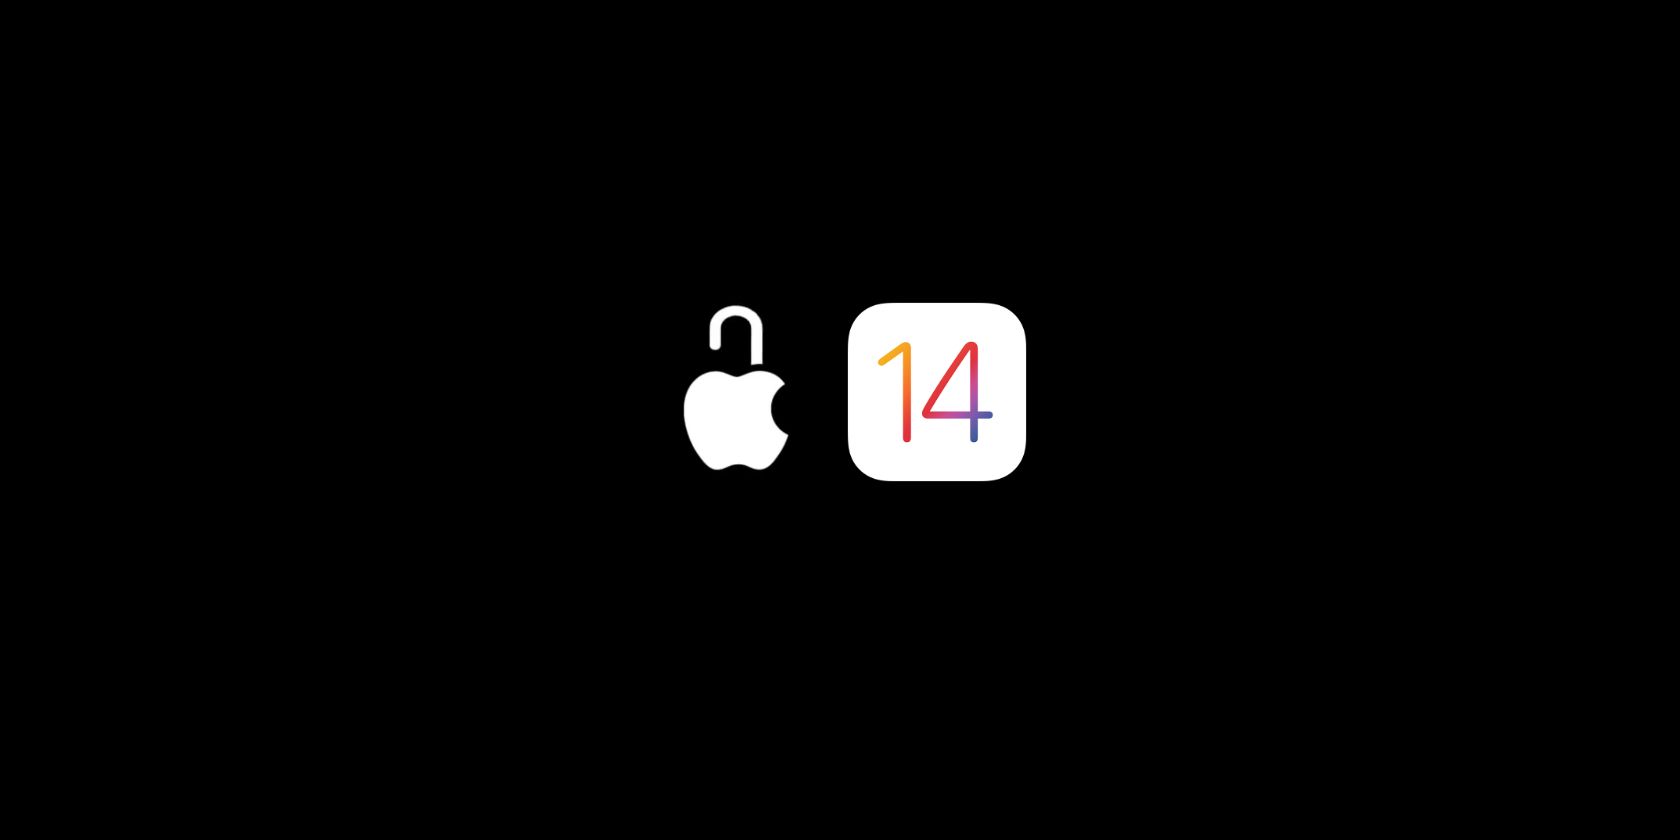 Apple's privacy graphic of an Apple logo padlock with the iOS 14 logo